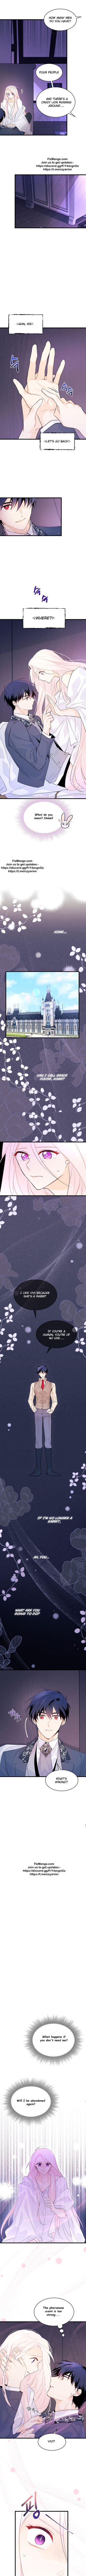 the-symbiotic-relationship-between-a-rabbit-and-a-black-panther-chap-37.5-0